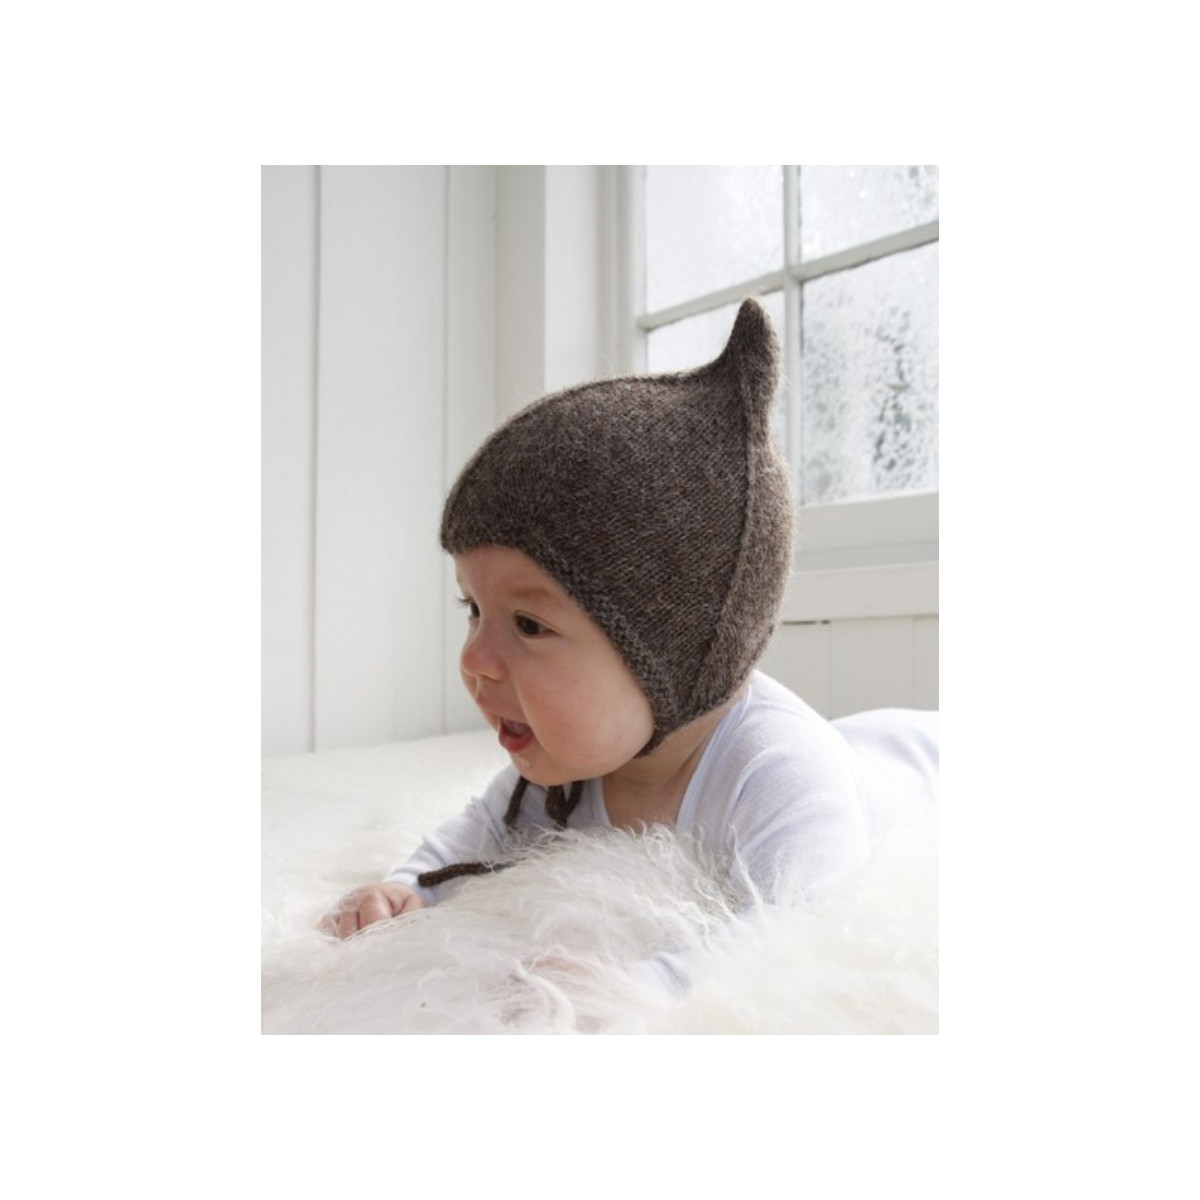 Alladin by DROPS Design - Knitted Baby Hat Pattern Size 1 months - 4 years  